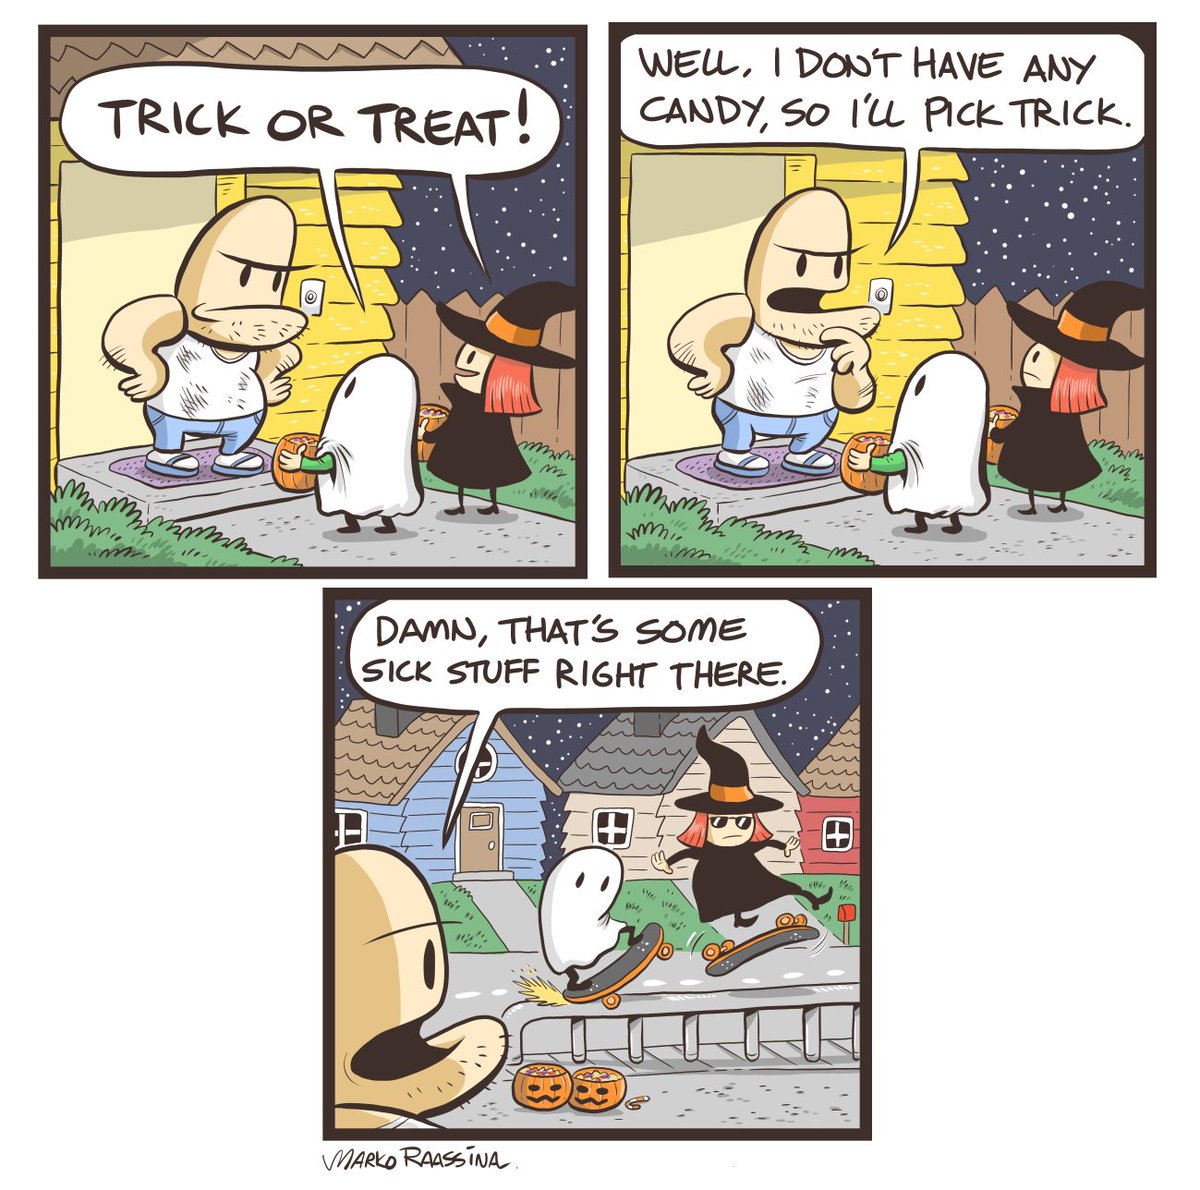 Some Halloween-themed comics from past years 